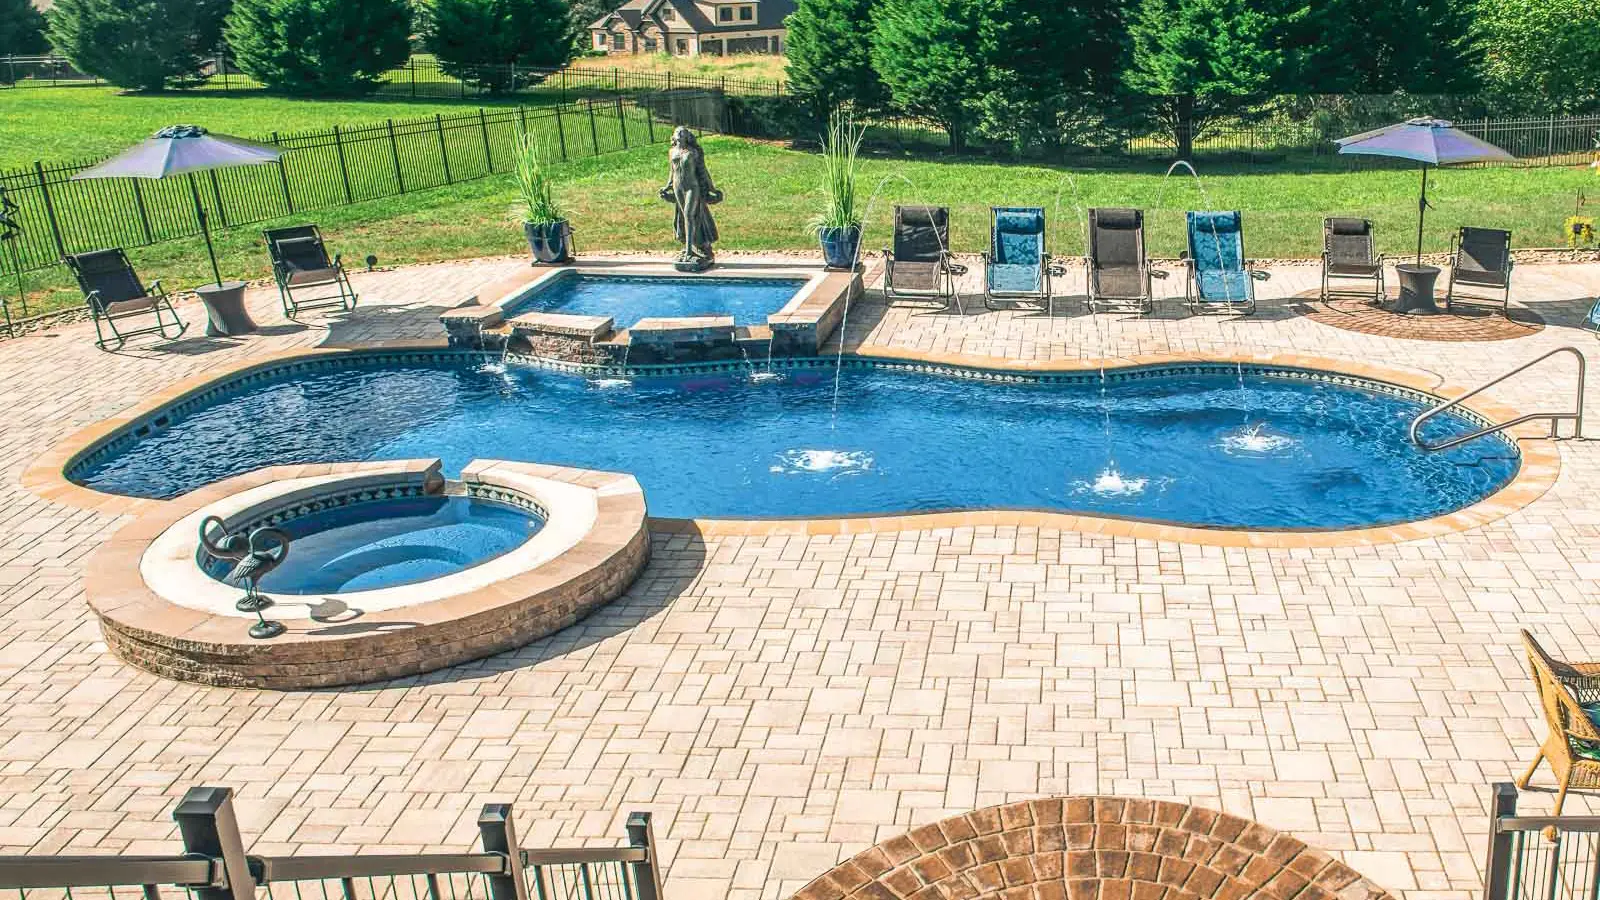 The Mediterranean, a fiberglass pool with a wraparound bench and incredible add-on design options